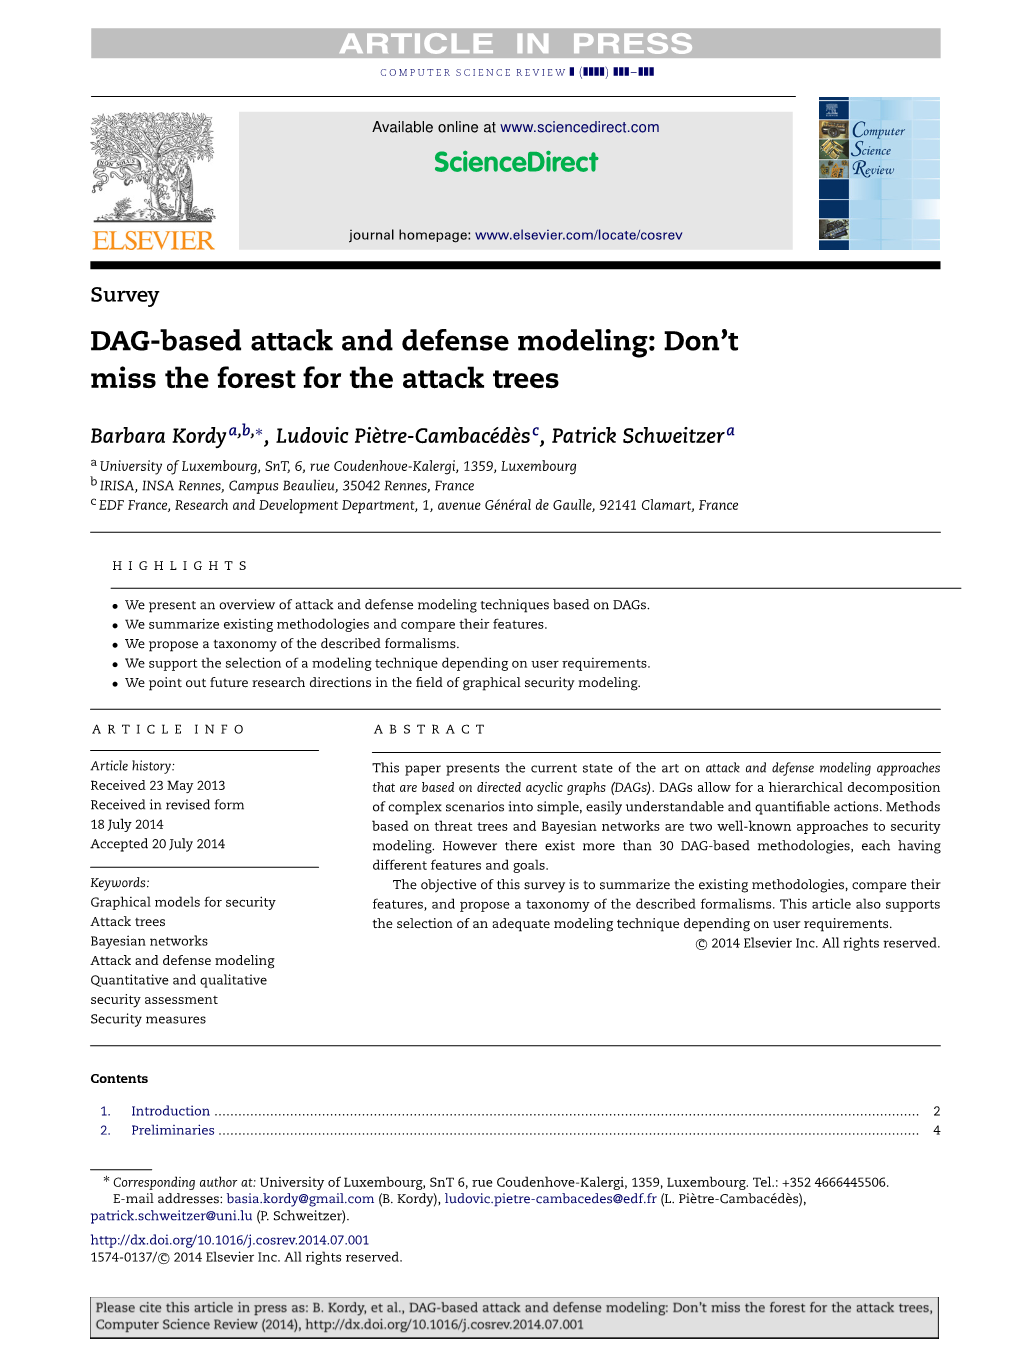 DAG-Based Attack and Defense Modeling: Don’T Miss the Forest for the Attack Trees